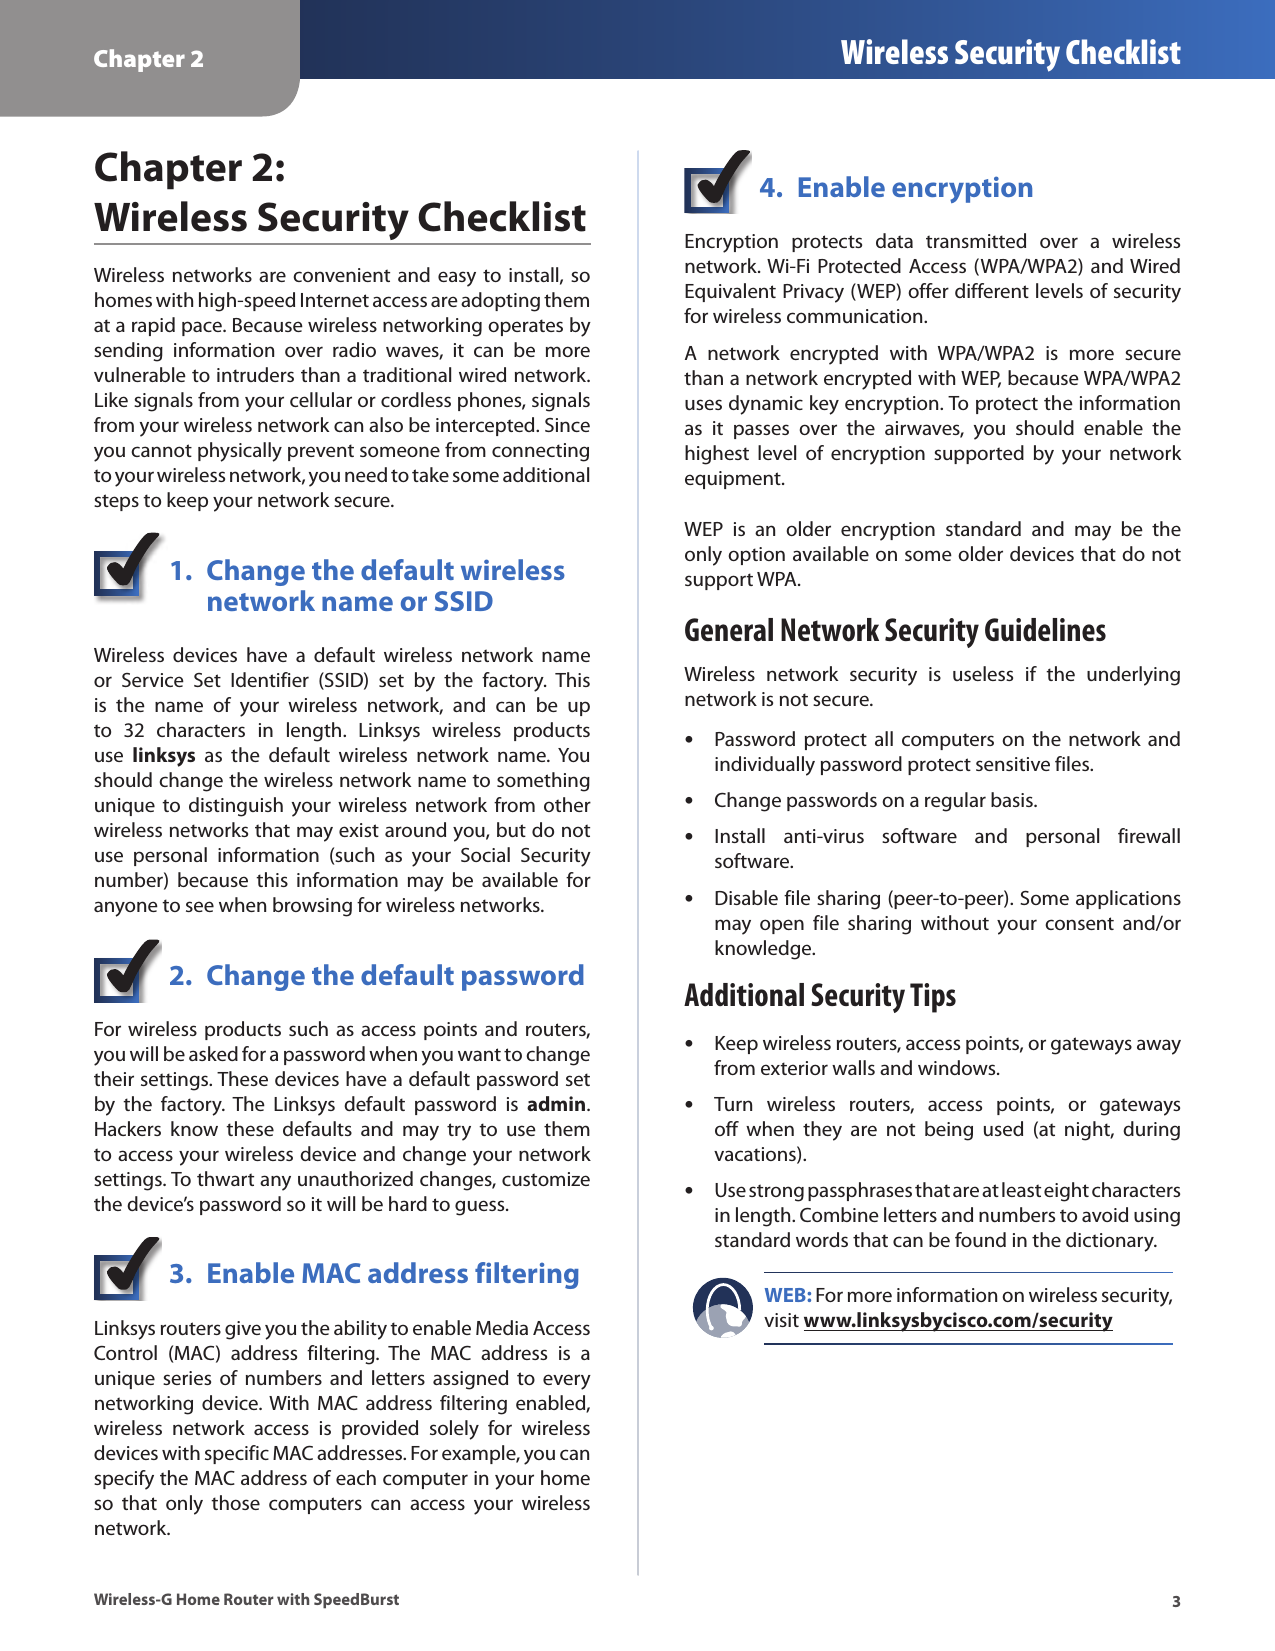 Chapter 2 Wireless Security Checklist3Wireless-G Home Router with SpeedBurstChapter 2:  Wireless Security ChecklistWireless  networks are convenient  and  easy to install, so homes with high-speed Internet access are adopting them at a rapid pace. Because wireless networking operates by sending  information  over  radio  waves,  it  can  be  more vulnerable to intruders than a traditional wired network. Like signals from your cellular or cordless phones, signals from your wireless network can also be intercepted. Since you cannot physically prevent someone from connecting to your wireless network, you need to take some additional steps to keep your network secure. 1.  Change the default wireless    network name or SSIDWireless  devices  have  a  default  wireless  network  name or  Service  Set  Identifier  (SSID)  set  by  the  factory.  This is  the  name  of  your  wireless  network,  and  can  be  up to  32  characters  in  length.  Linksys  wireless  products use  linksys  as  the  default  wireless  network  name.  You should change the wireless network name to something unique  to distinguish  your wireless  network from  other wireless networks that may exist around you, but do not use  personal  information  (such  as  your  Social  Security number)  because  this  information  may  be  available  for anyone to see when browsing for wireless networks. 2.  Change the default passwordFor wireless products such as access points and routers, you will be asked for a password when you want to change their settings. These devices have a default password set by  the  factory.  The  Linksys  default  password  is  admin. Hackers  know  these  defaults  and  may  try  to  use  them to access your wireless device and change your network settings. To thwart any unauthorized changes, customize the device’s password so it will be hard to guess.3.  Enable MAC address filteringLinksys routers give you the ability to enable Media Access Control  (MAC)  address  filtering.  The  MAC  address  is  a unique  series  of  numbers  and  letters  assigned  to  every networking  device. With  MAC  address filtering  enabled, wireless  network  access  is  provided  solely  for  wireless devices with specific MAC addresses. For example, you can specify the MAC address of each computer in your home so  that  only  those  computers  can  access  your  wireless network. 4.  Enable encryptionEncryption  protects  data  transmitted  over  a  wireless network. Wi-Fi Protected  Access (WPA/WPA2) and Wired Equivalent Privacy (WEP) offer different levels of security for wireless communication.A  network  encrypted  with  WPA/WPA2  is  more  secure than a network encrypted with WEP, because WPA/WPA2 uses dynamic key encryption. To protect the information as  it  passes  over  the  airwaves,  you  should  enable  the highest  level  of  encryption  supported  by  your  network equipment. WEP  is  an  older  encryption  standard  and  may  be  the only option available on some older devices that do not support WPA.General Network Security GuidelinesWireless  network  security  is  useless  if  the  underlying network is not secure.  •Password protect  all computers on  the network  and individually password protect sensitive files. •Change passwords on a regular basis. •Install  anti-virus  software  and  personal  firewall software. •Disable file sharing (peer-to-peer). Some applications may  open  file  sharing  without  your  consent  and/or knowledge.Additional Security Tips •Keep wireless routers, access points, or gateways away from exterior walls and windows. •Turn  wireless  routers,  access  points,  or  gateways off  when  they  are  not  being  used  (at  night,  during vacations). •Use strong passphrases that are at least eight characters in length. Combine letters and numbers to avoid using standard words that can be found in the dictionary. WEB: For more information on wireless security, visit www.linksysbycisco.com/security